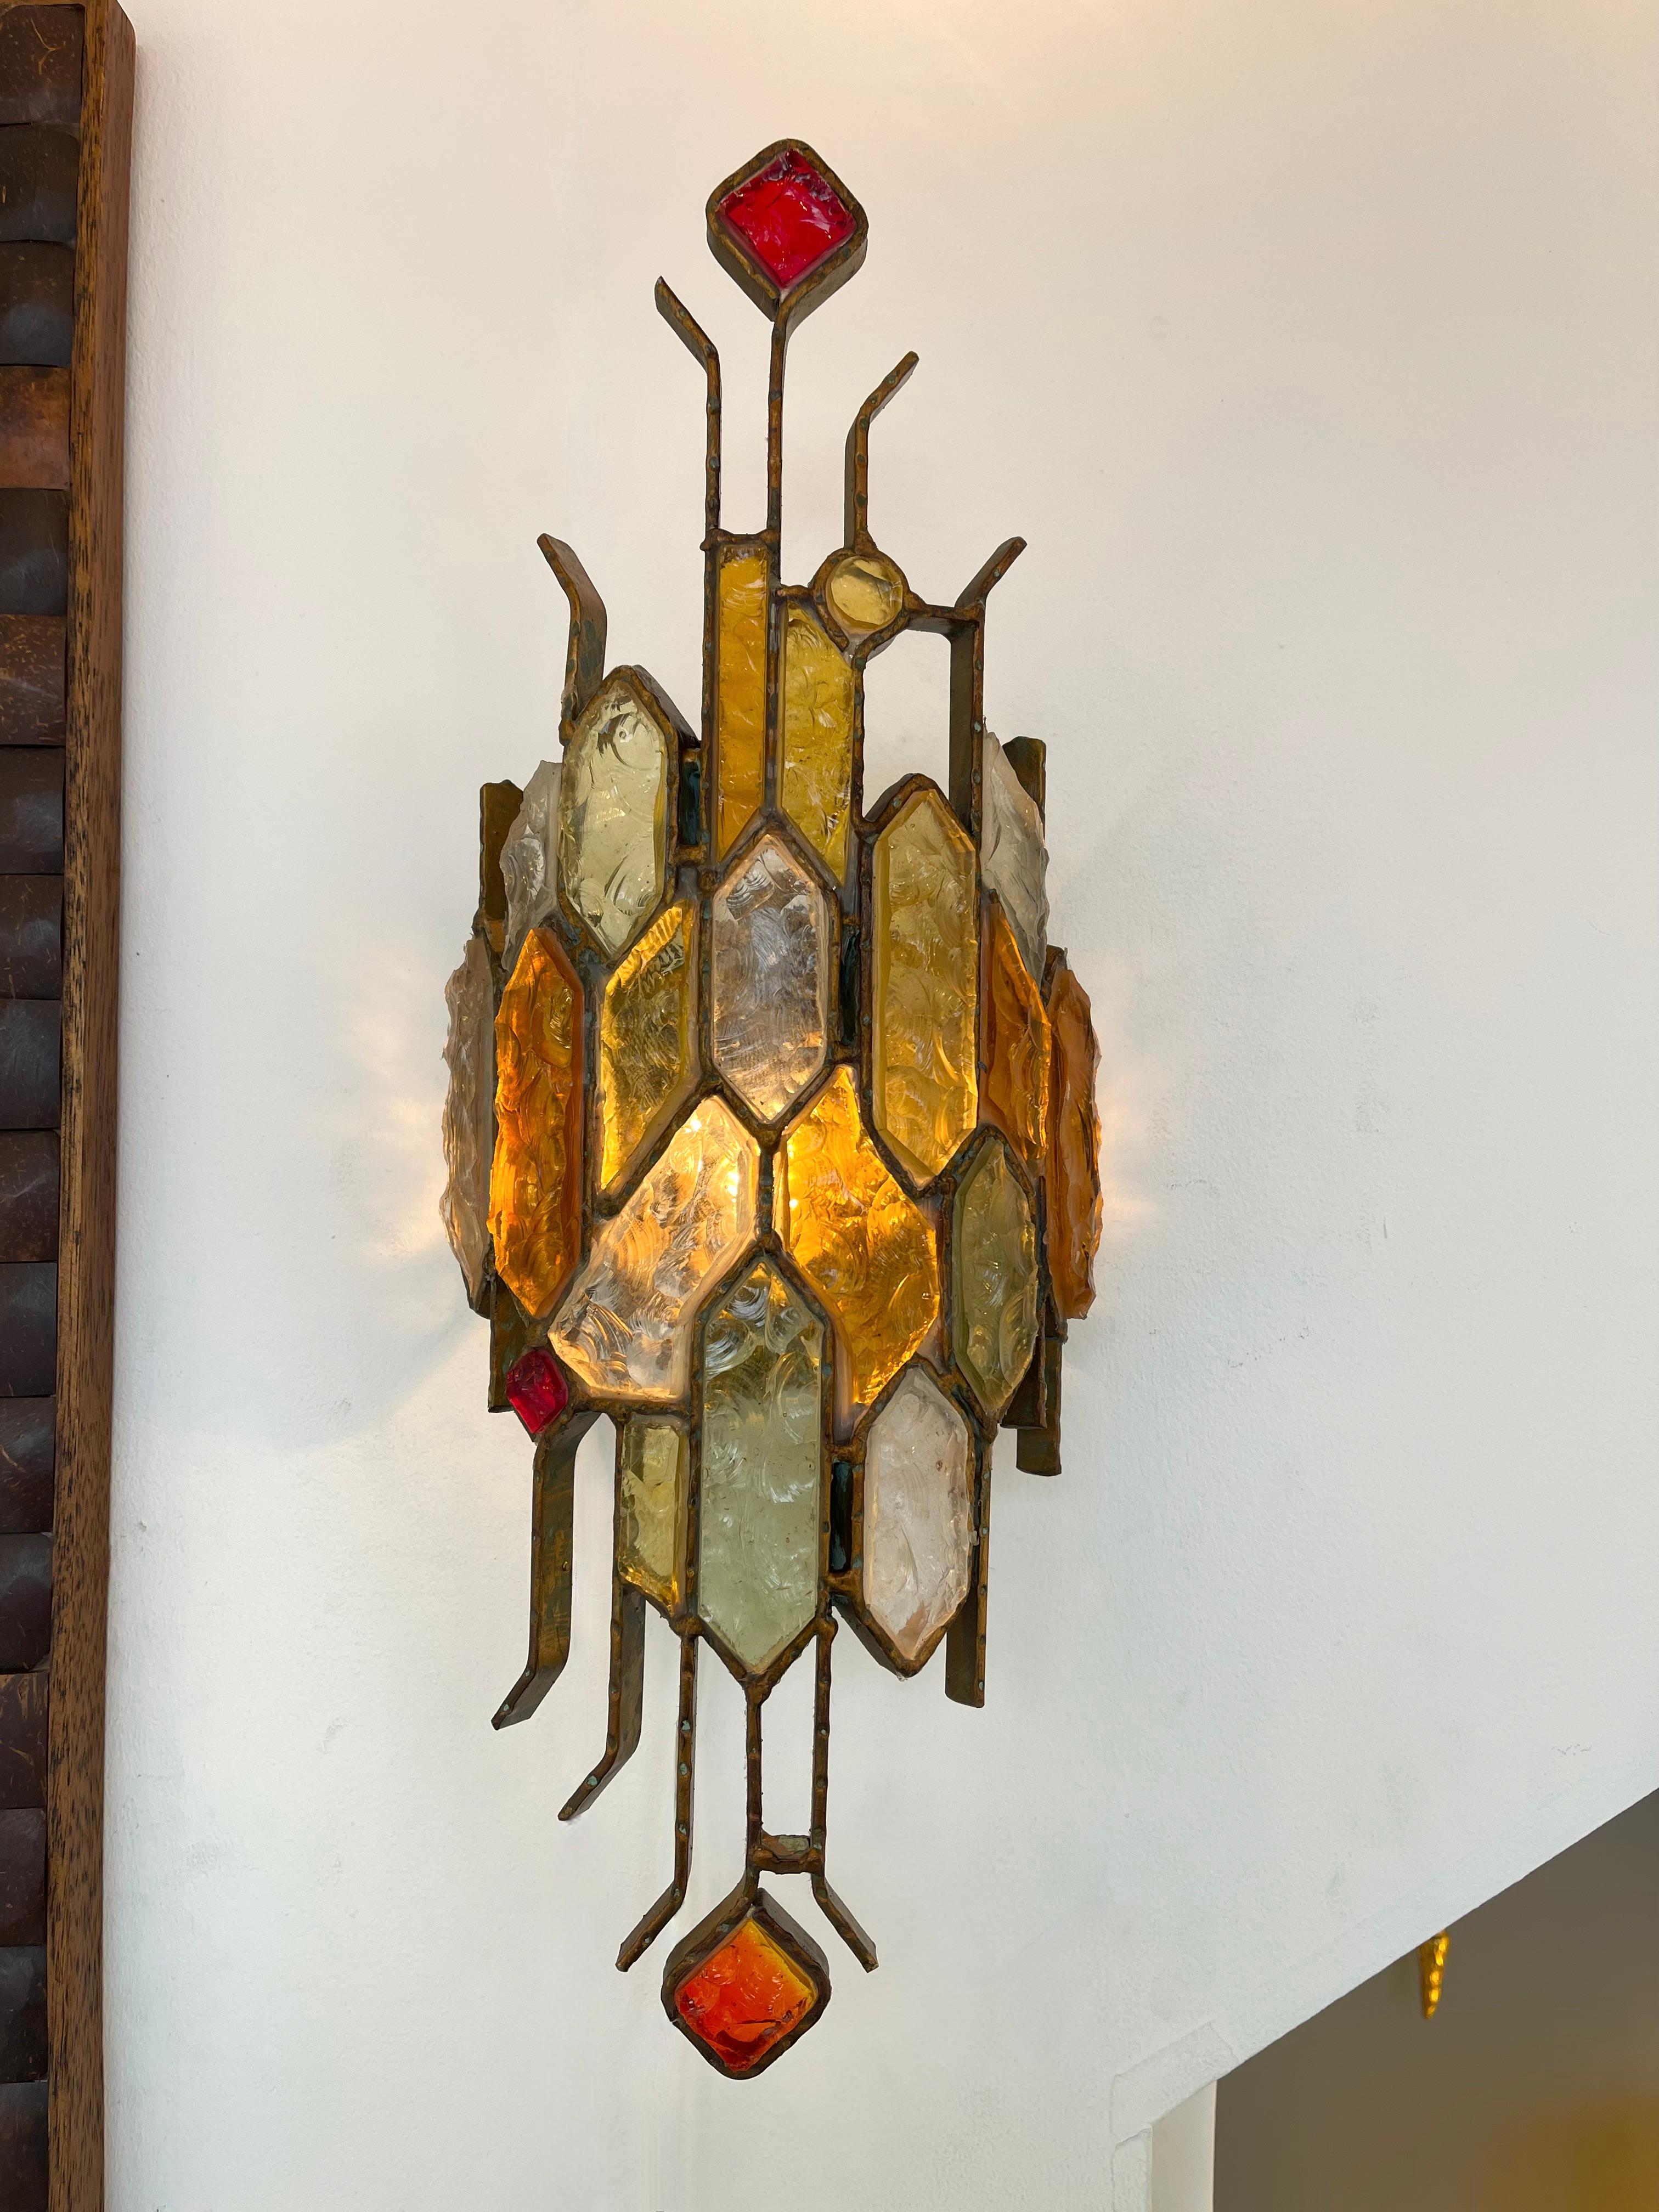 Brutalist Pair of Hammered Glass Wrought Iron Sconces by Longobard, Italy, 1970s For Sale